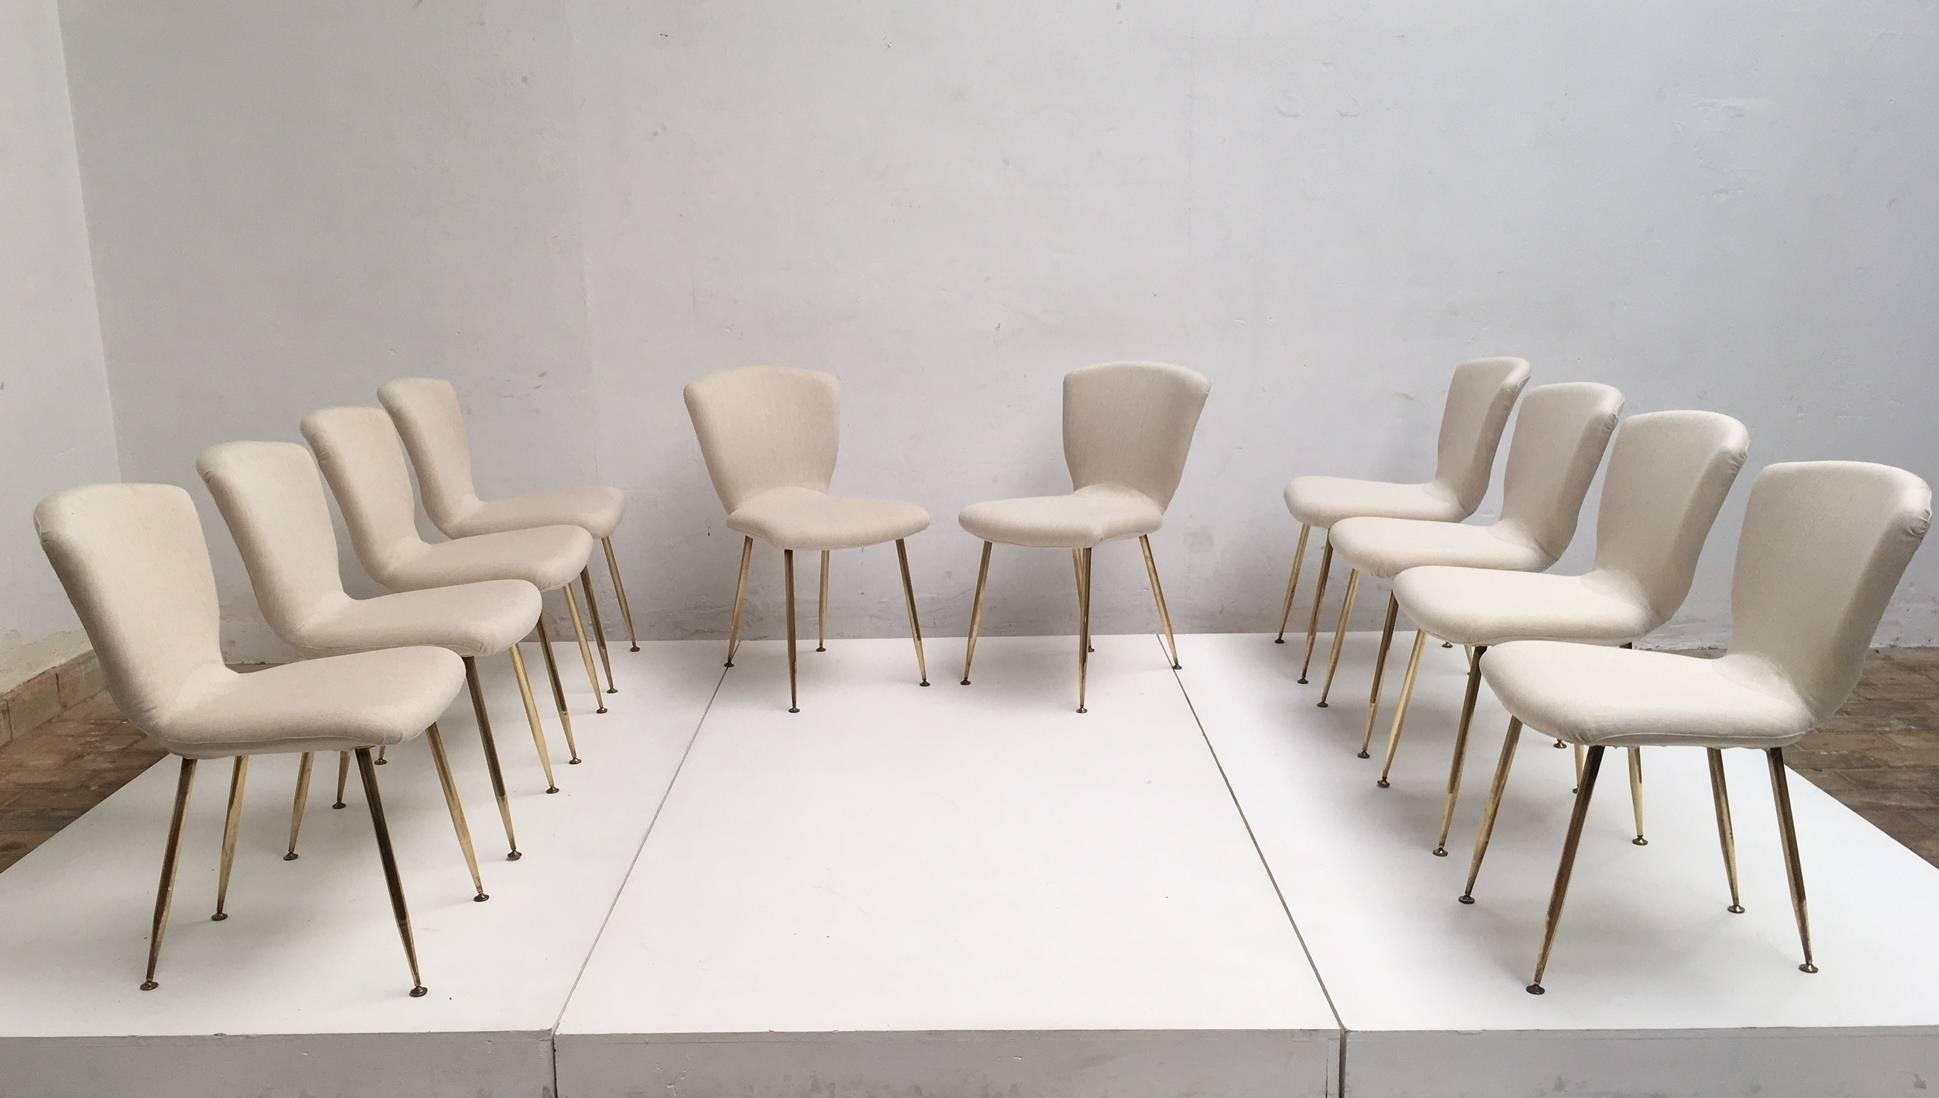 Mid-Century Modern 10 Dining Chairs by Louis Sognot for Arflex, 1959, brass legs, Upholstery Restored